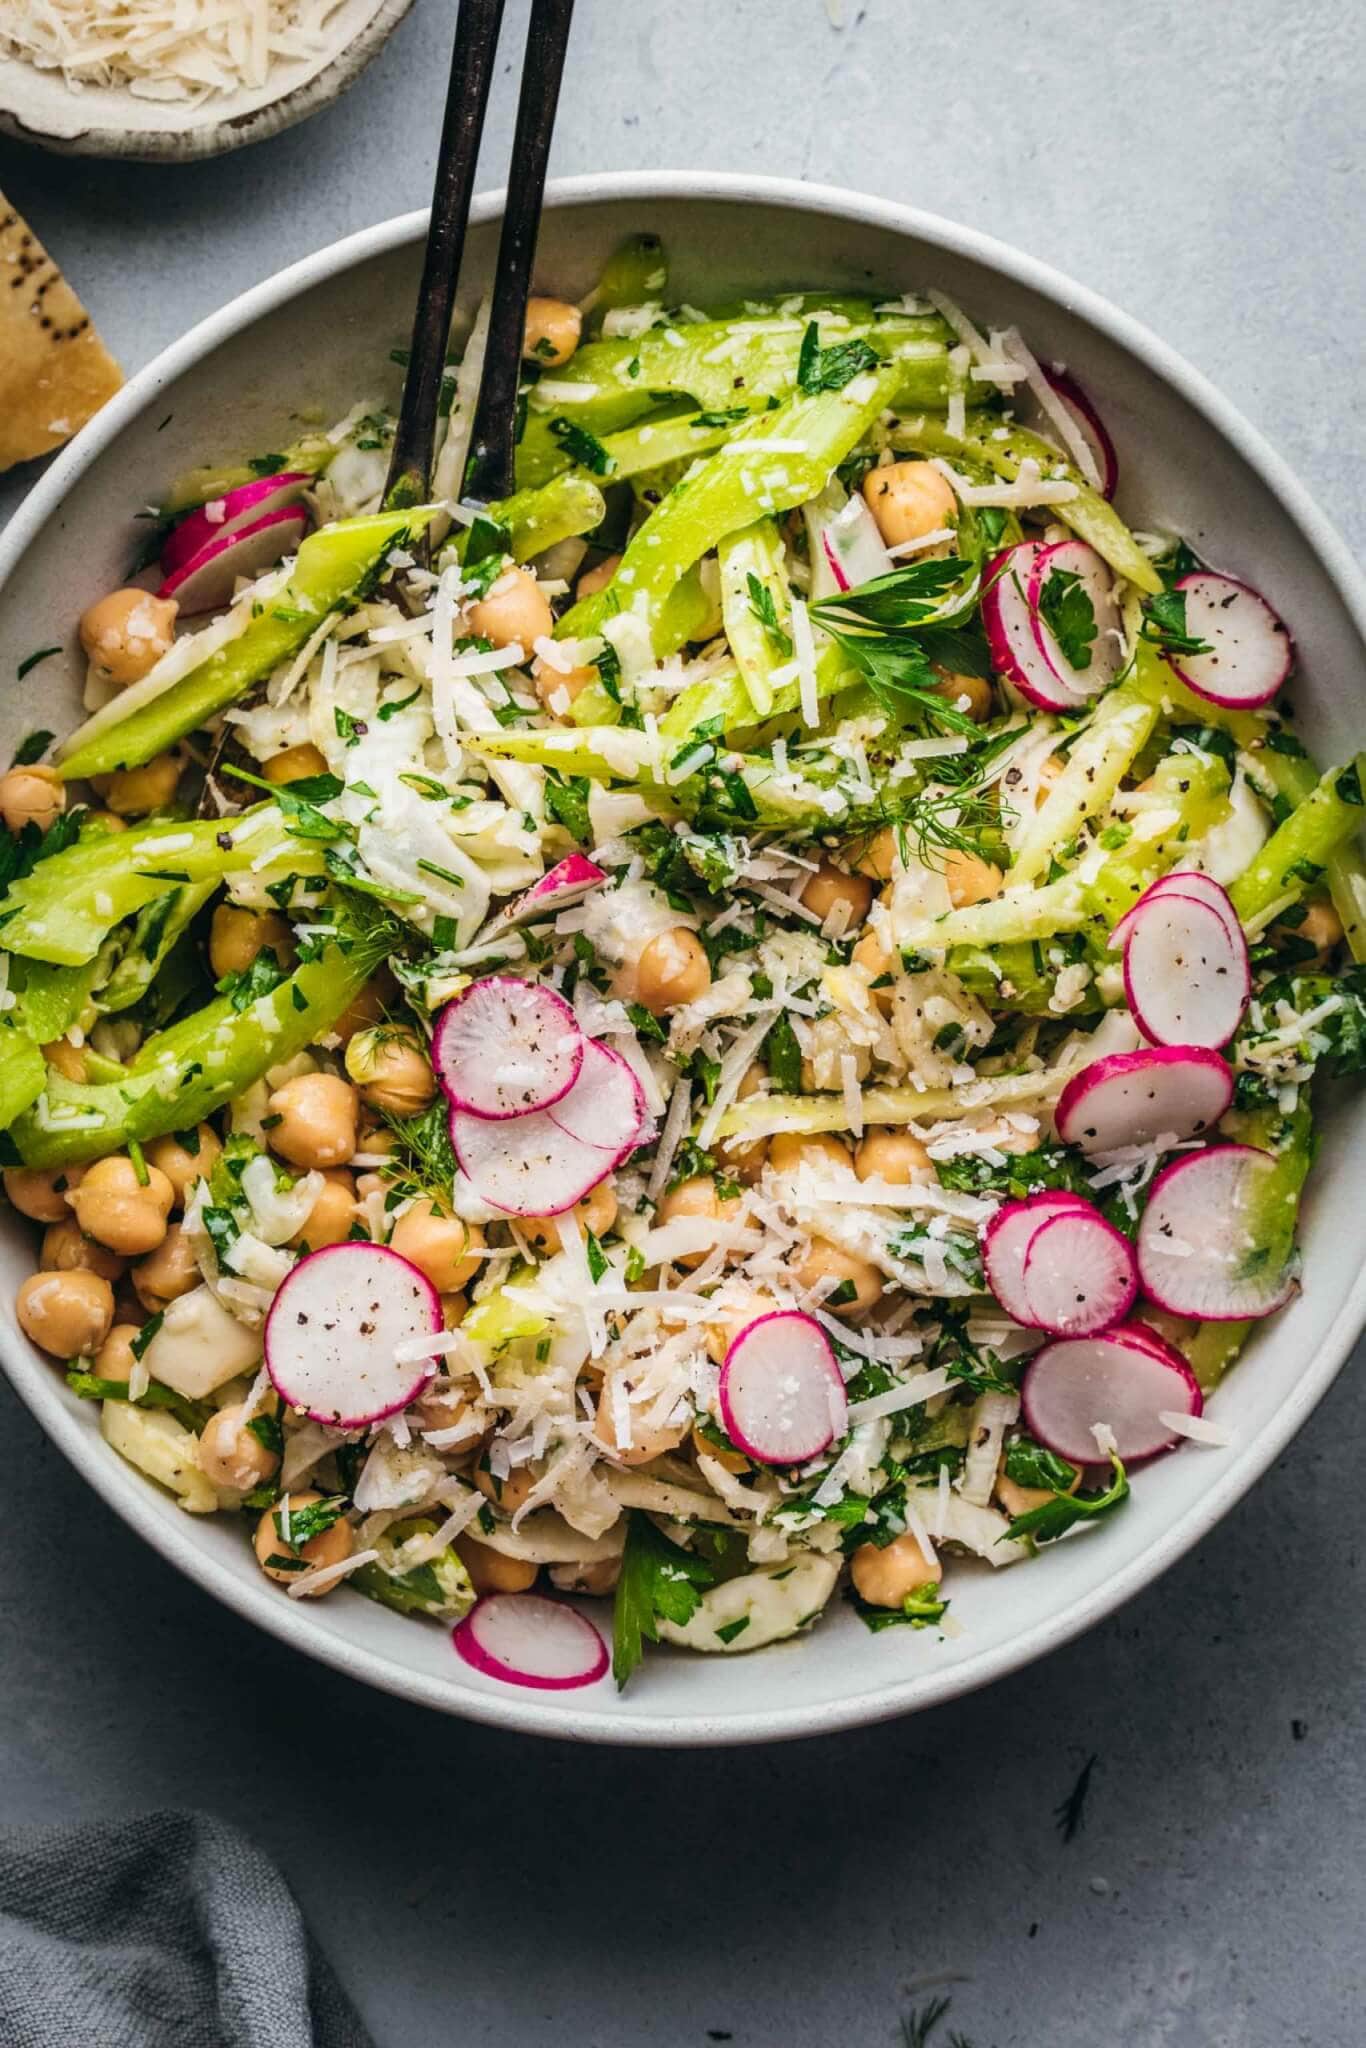 Fennel salad with chickpeas in white bowl.